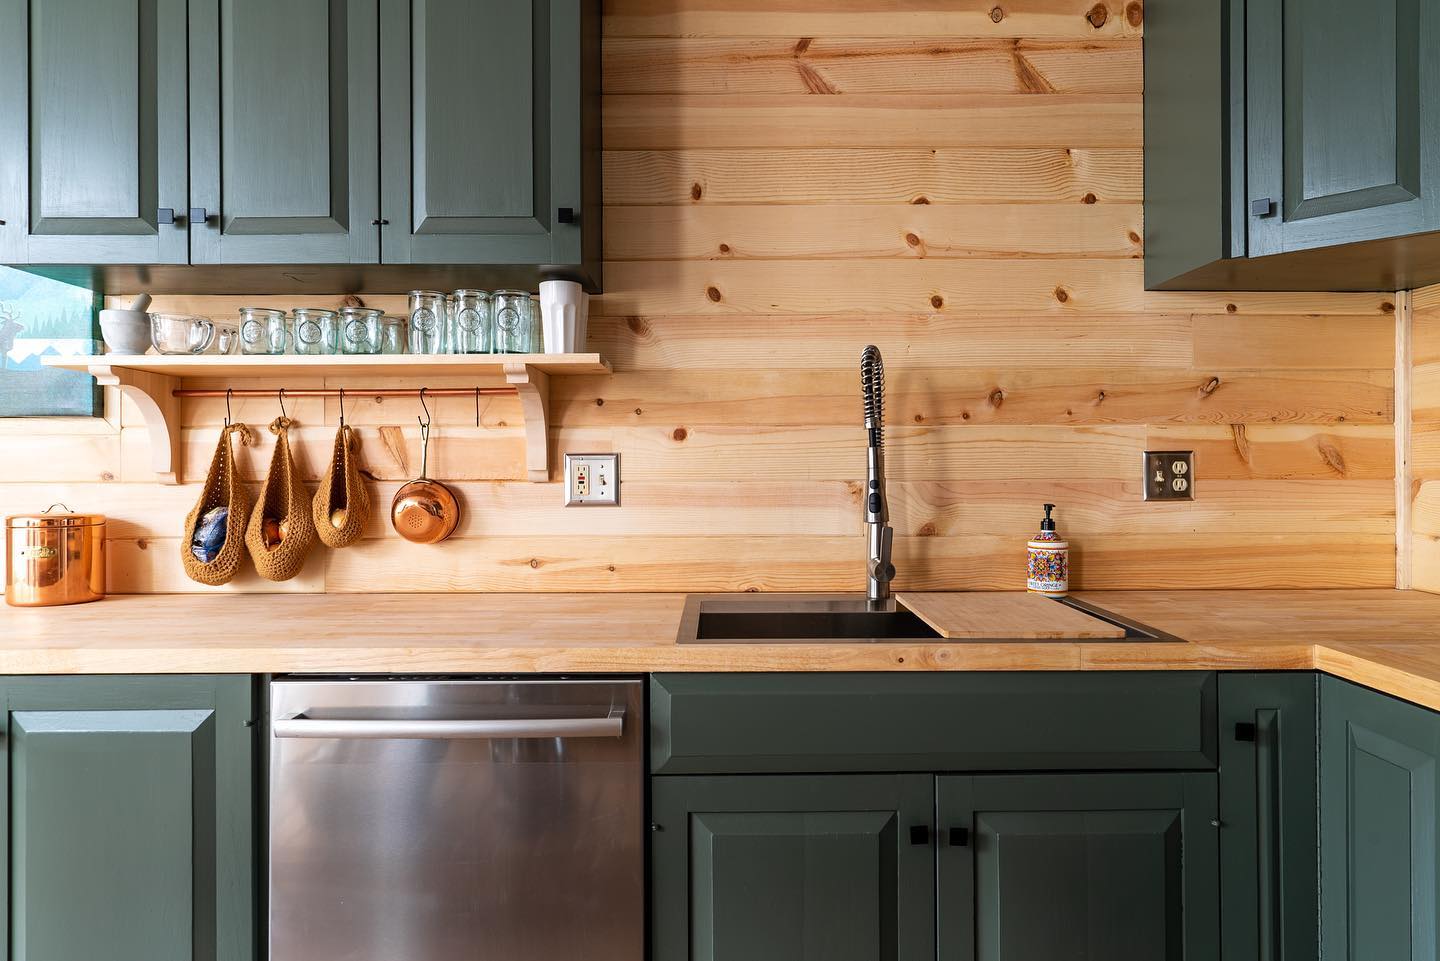 The photo depicts a modern kitchen with dark green cabinets, a rustic wooden wall, stainless steel appliances, and decorative woven baskets.